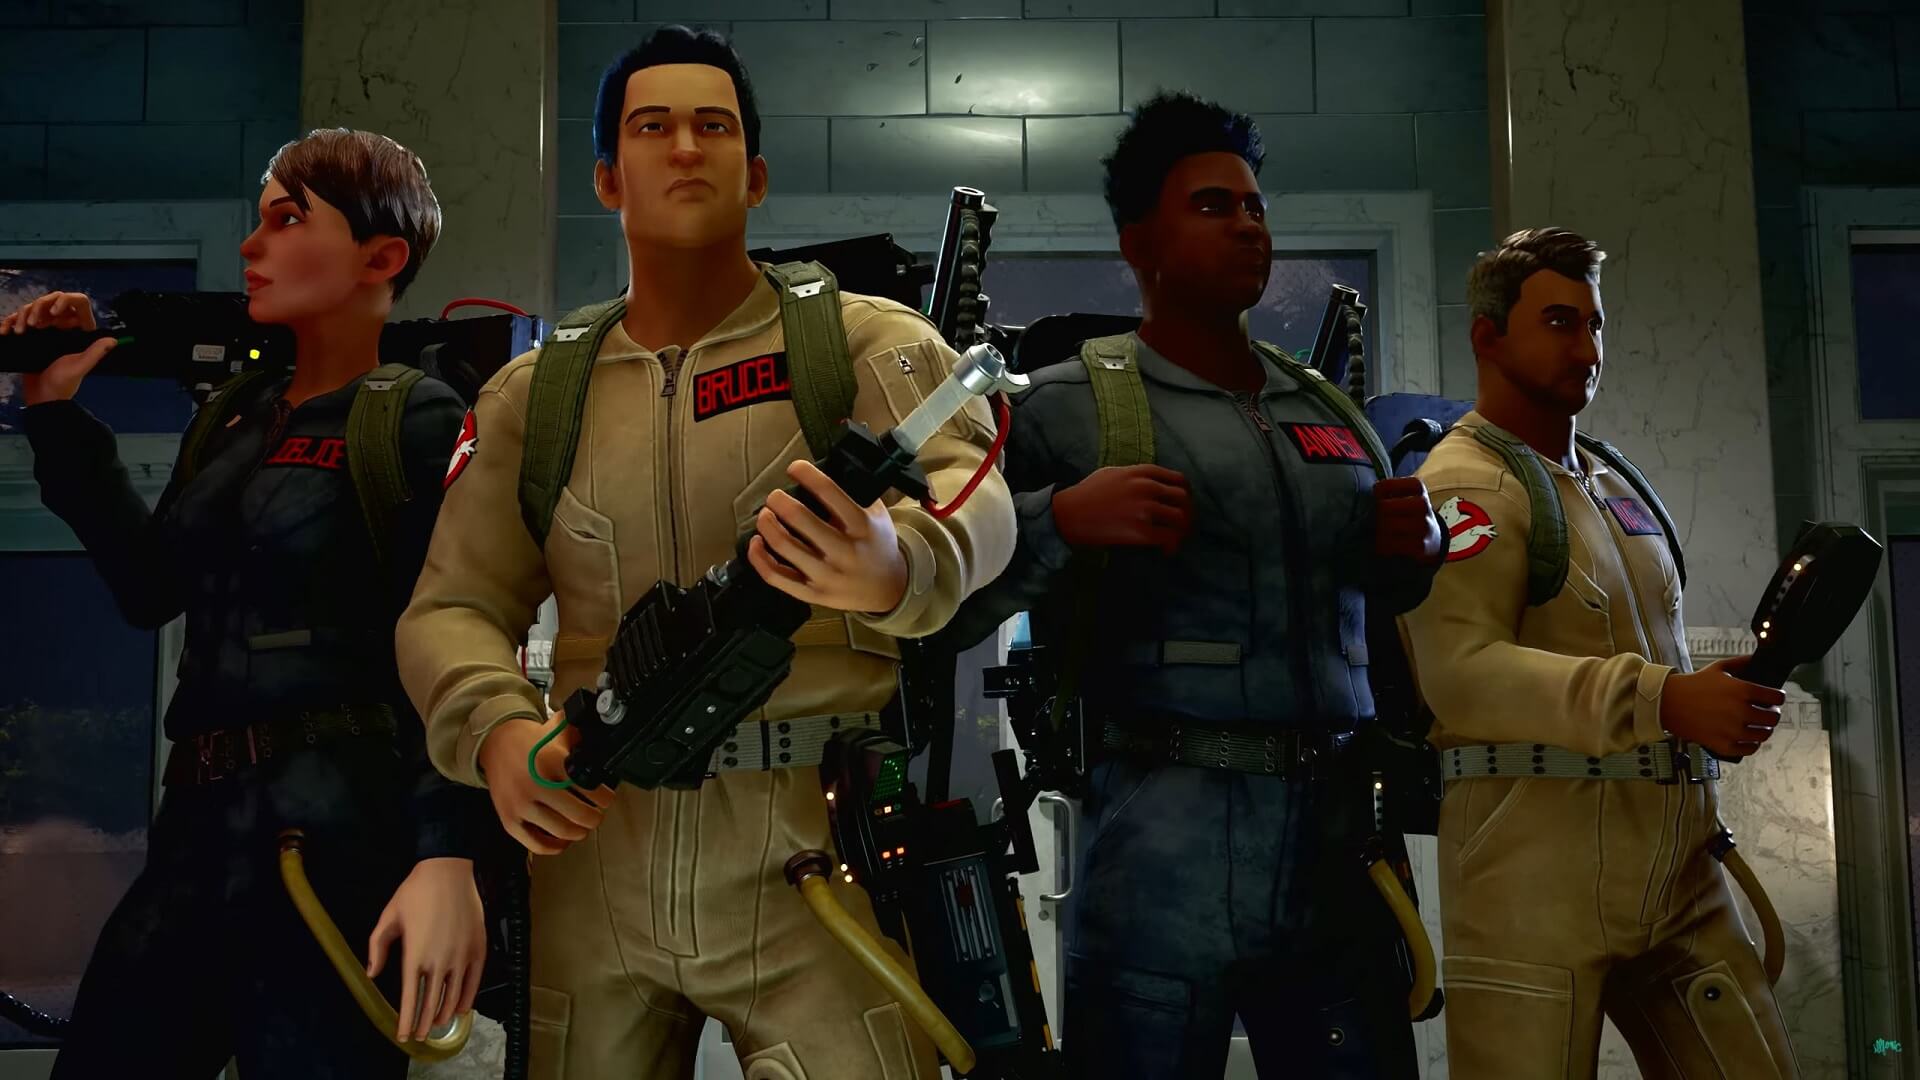 Four customized Ghostbusters in Ghostbusters: Spirits Unleashed